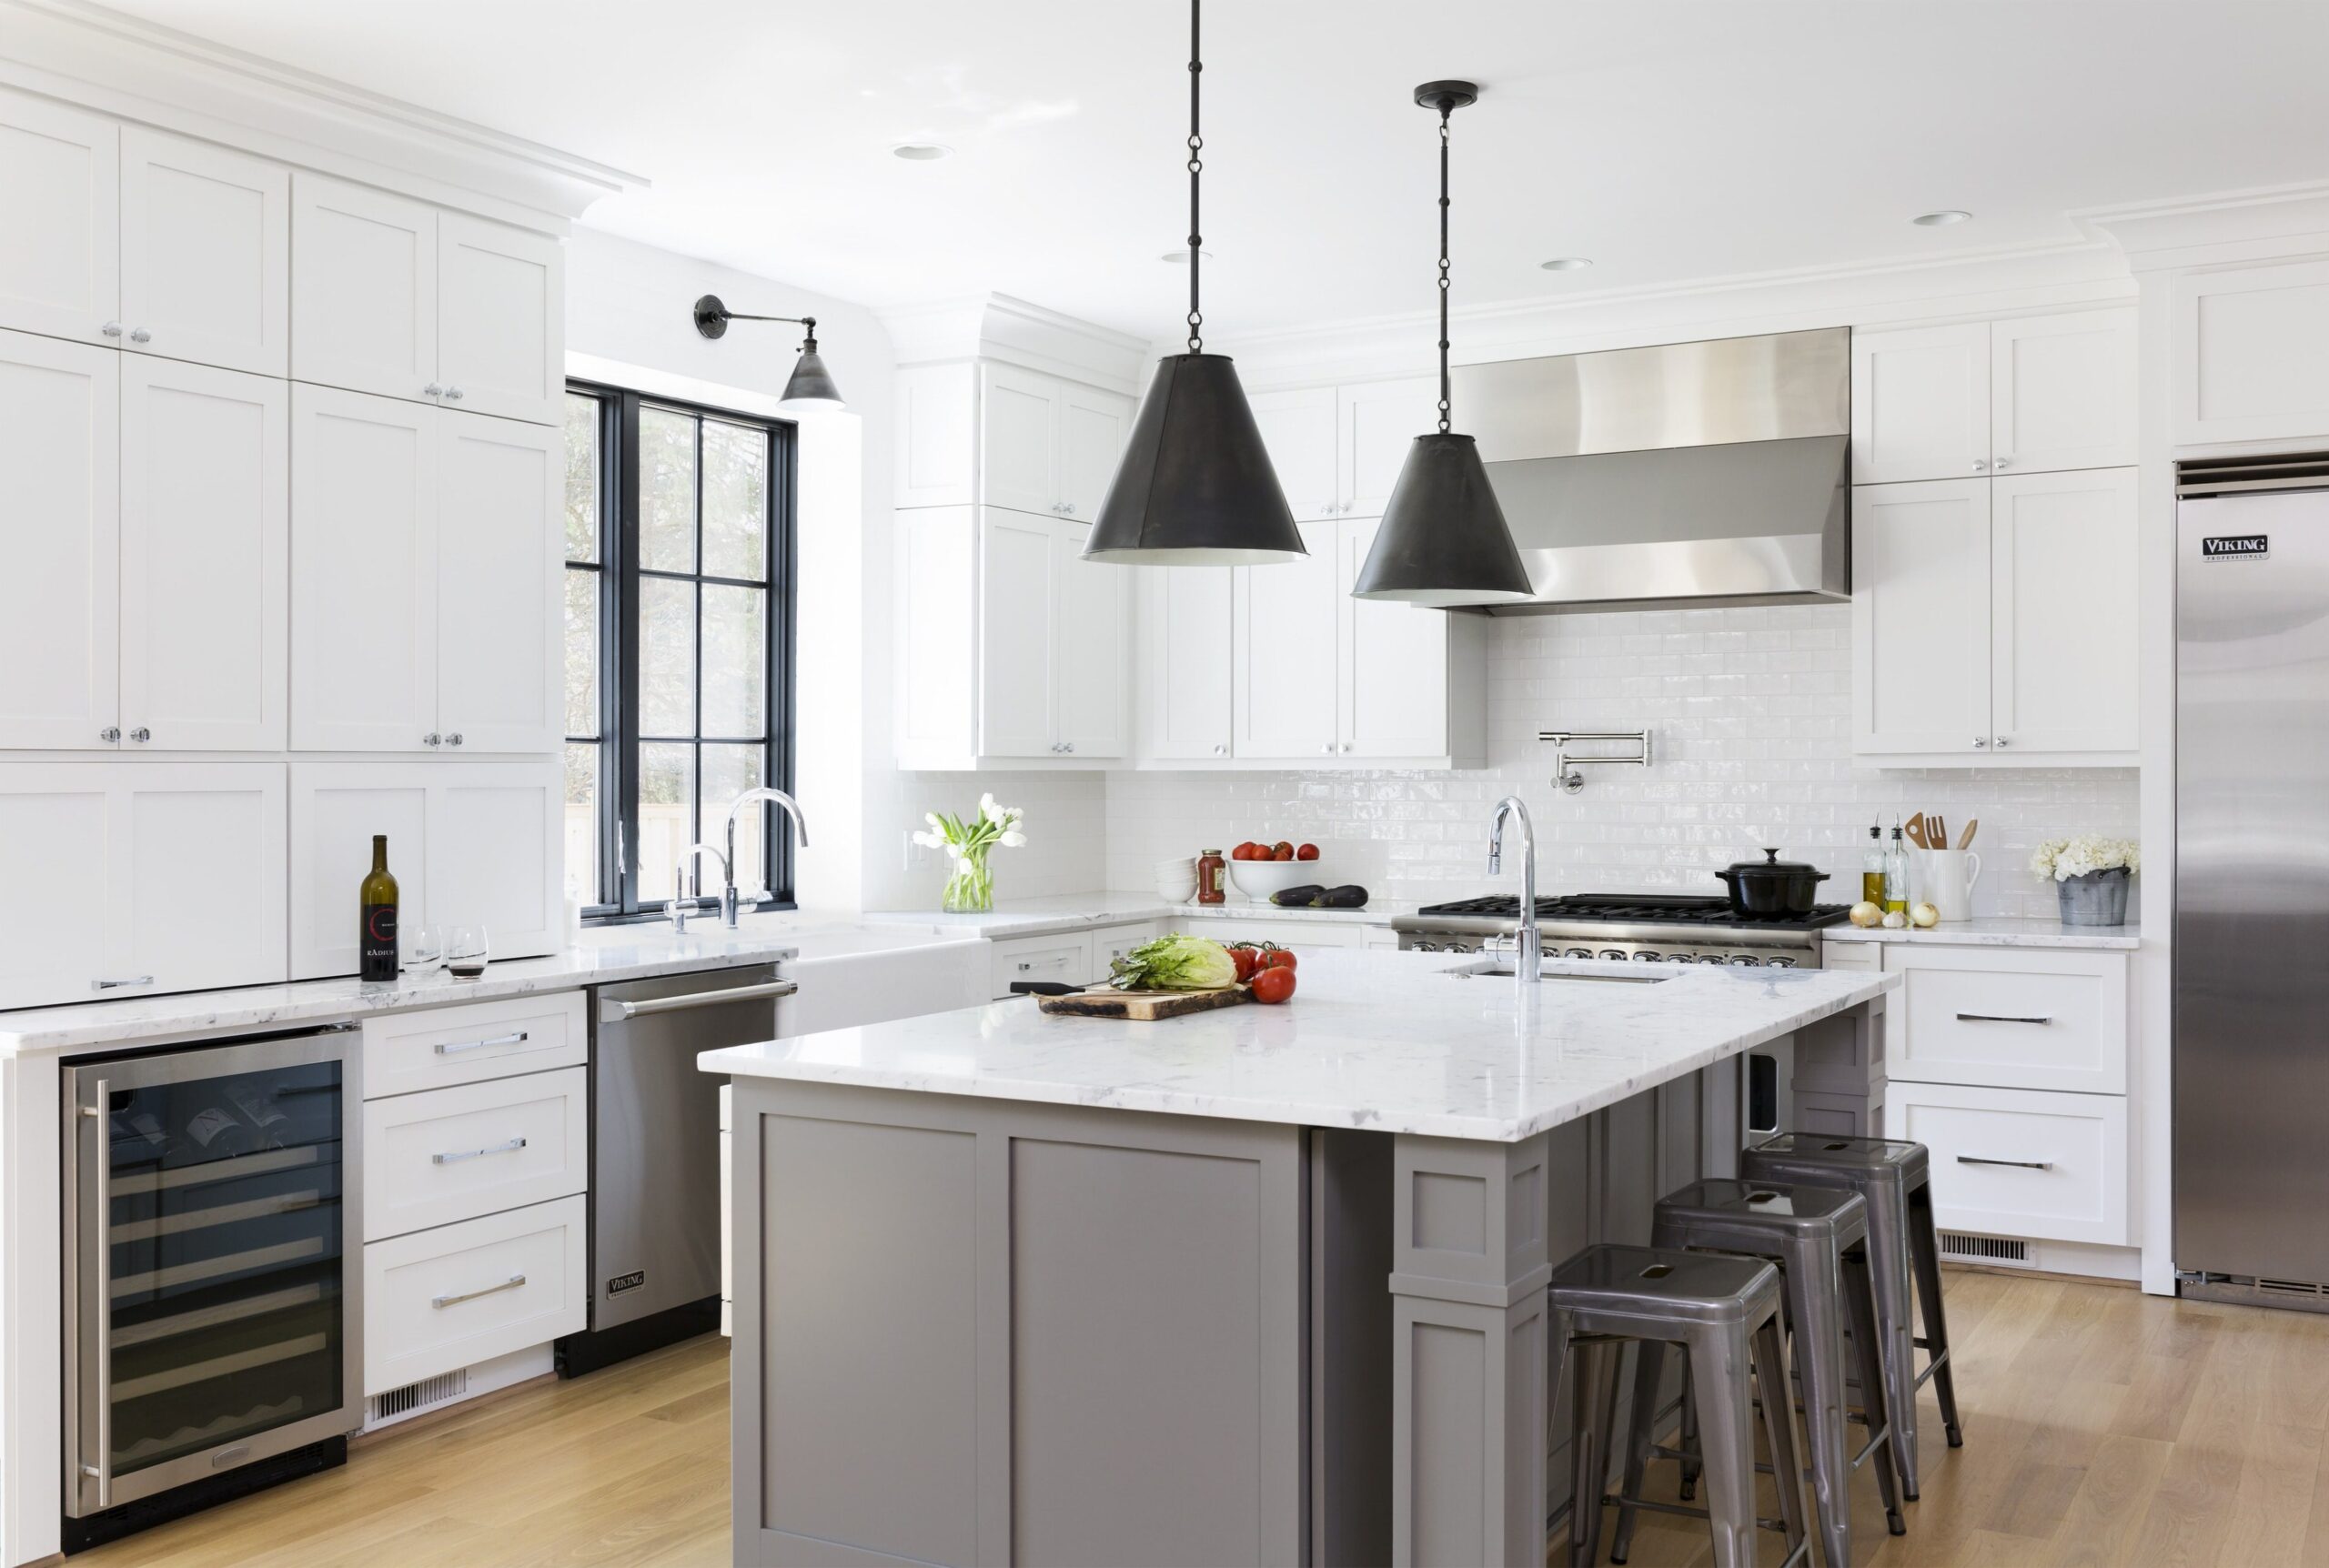 White Cabinets With Grey Island Ideas - Photos & Ideas  Houzz - grey kitchen island with white cabinets